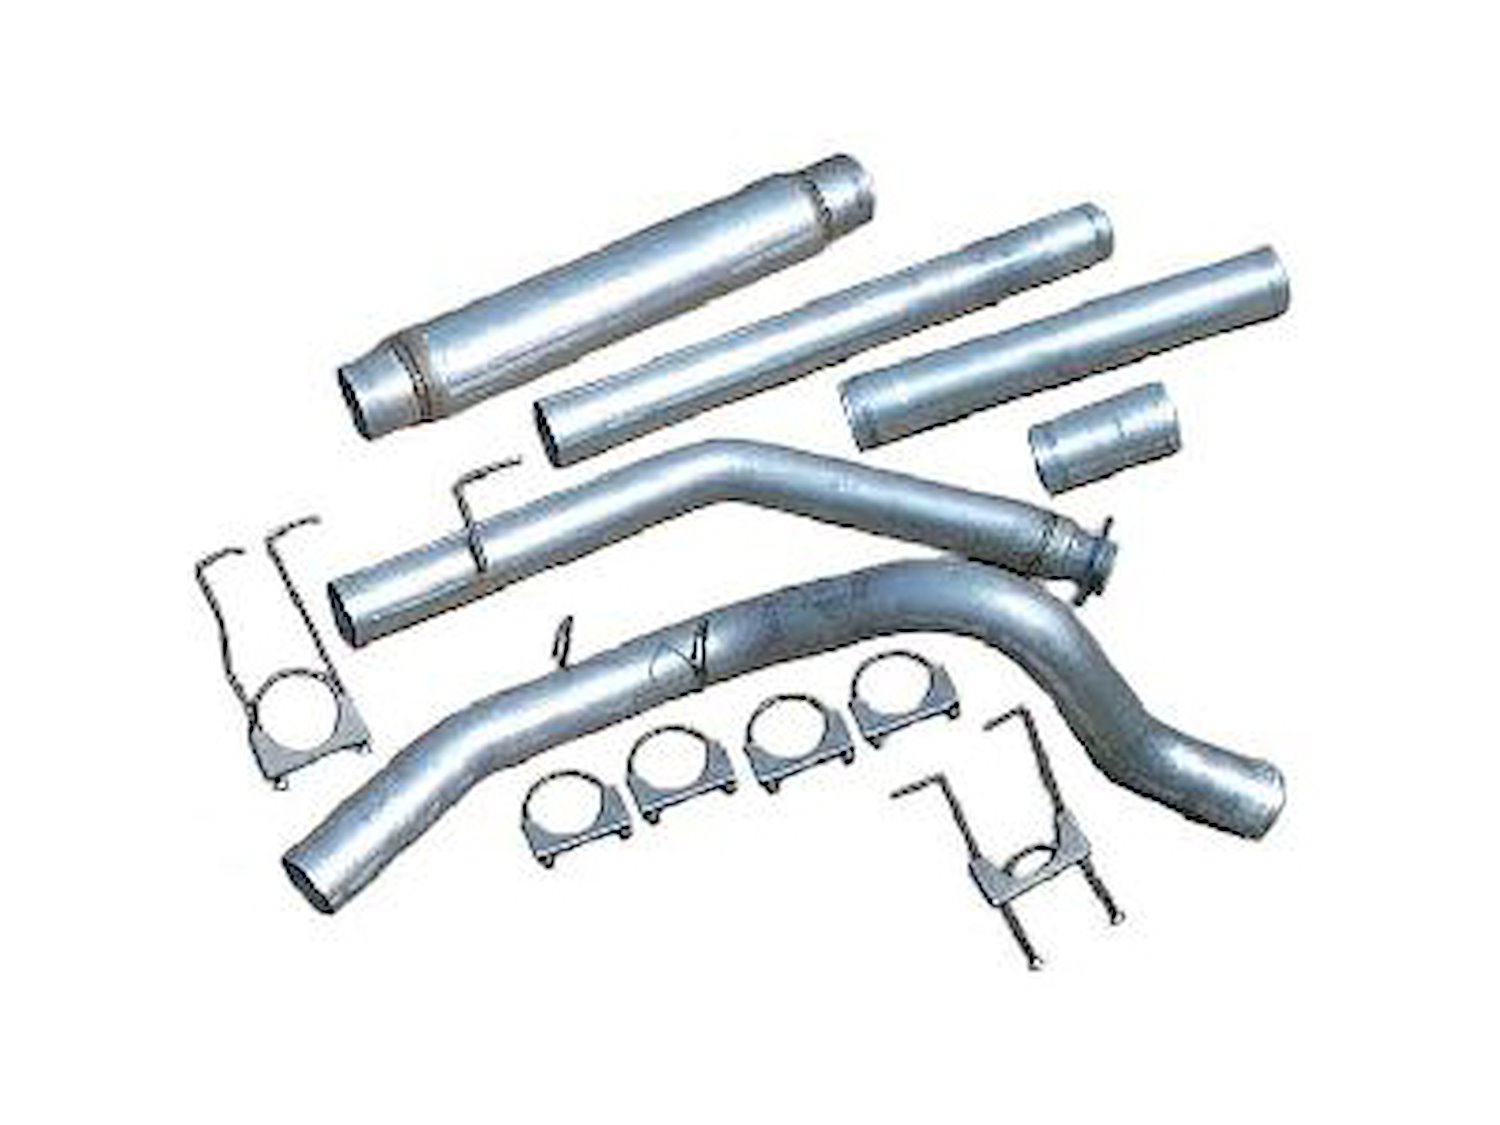 1998-1/2-2002 Dodge 3/4 & 1 Ton Pick-Up Turbo-Diesel Turbo-Back Exhaust System 5.9L Diesel with or without Converter